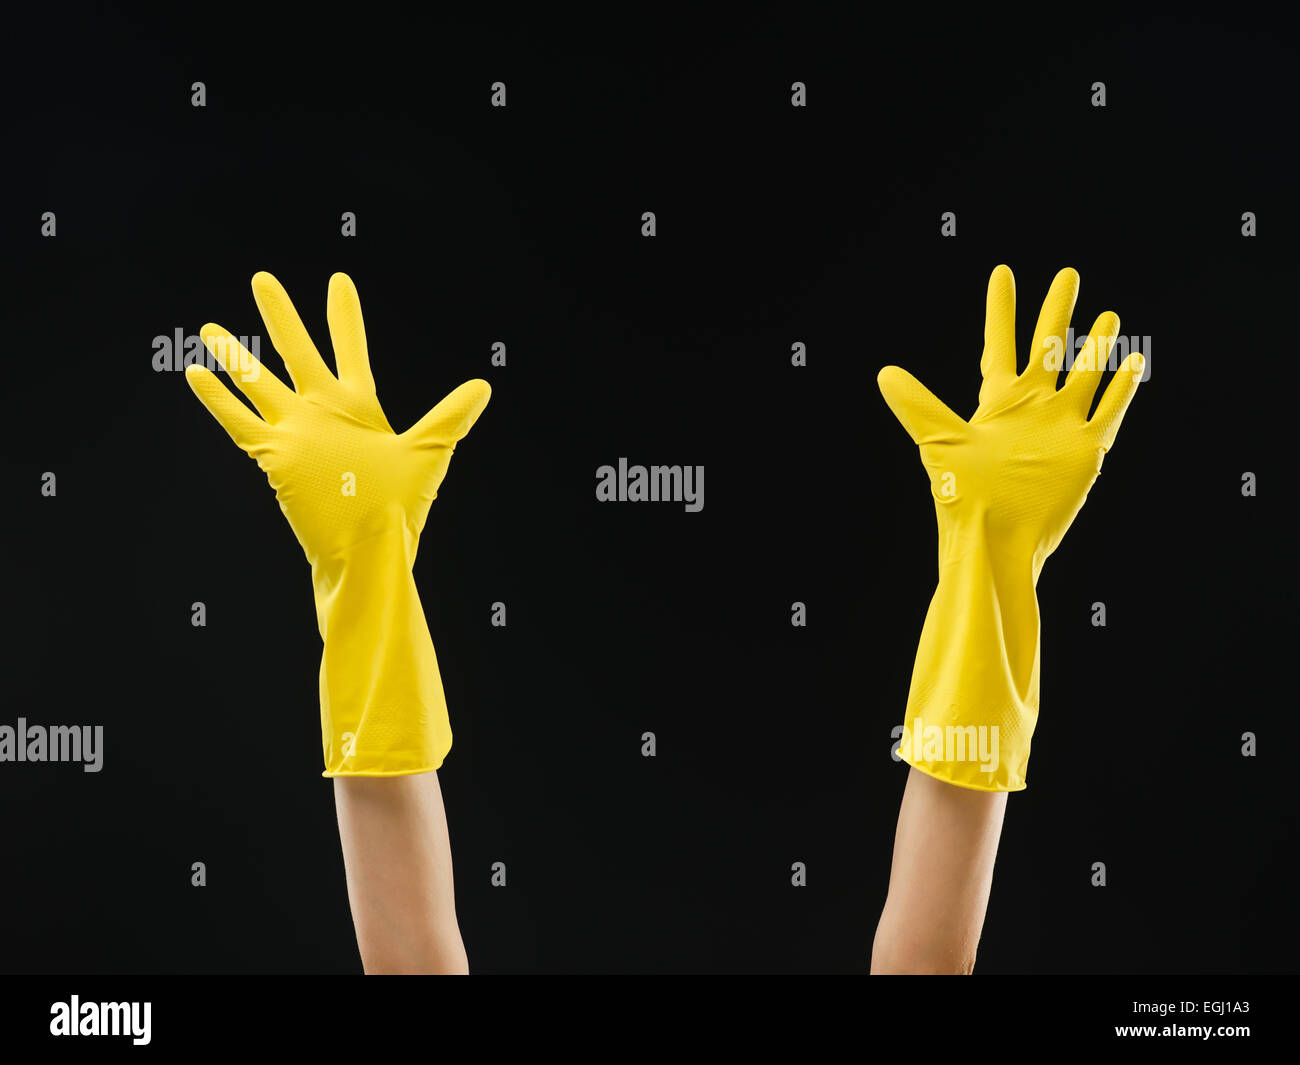 hands up with yellow rubber gloves with open palms on black background Stock Photo